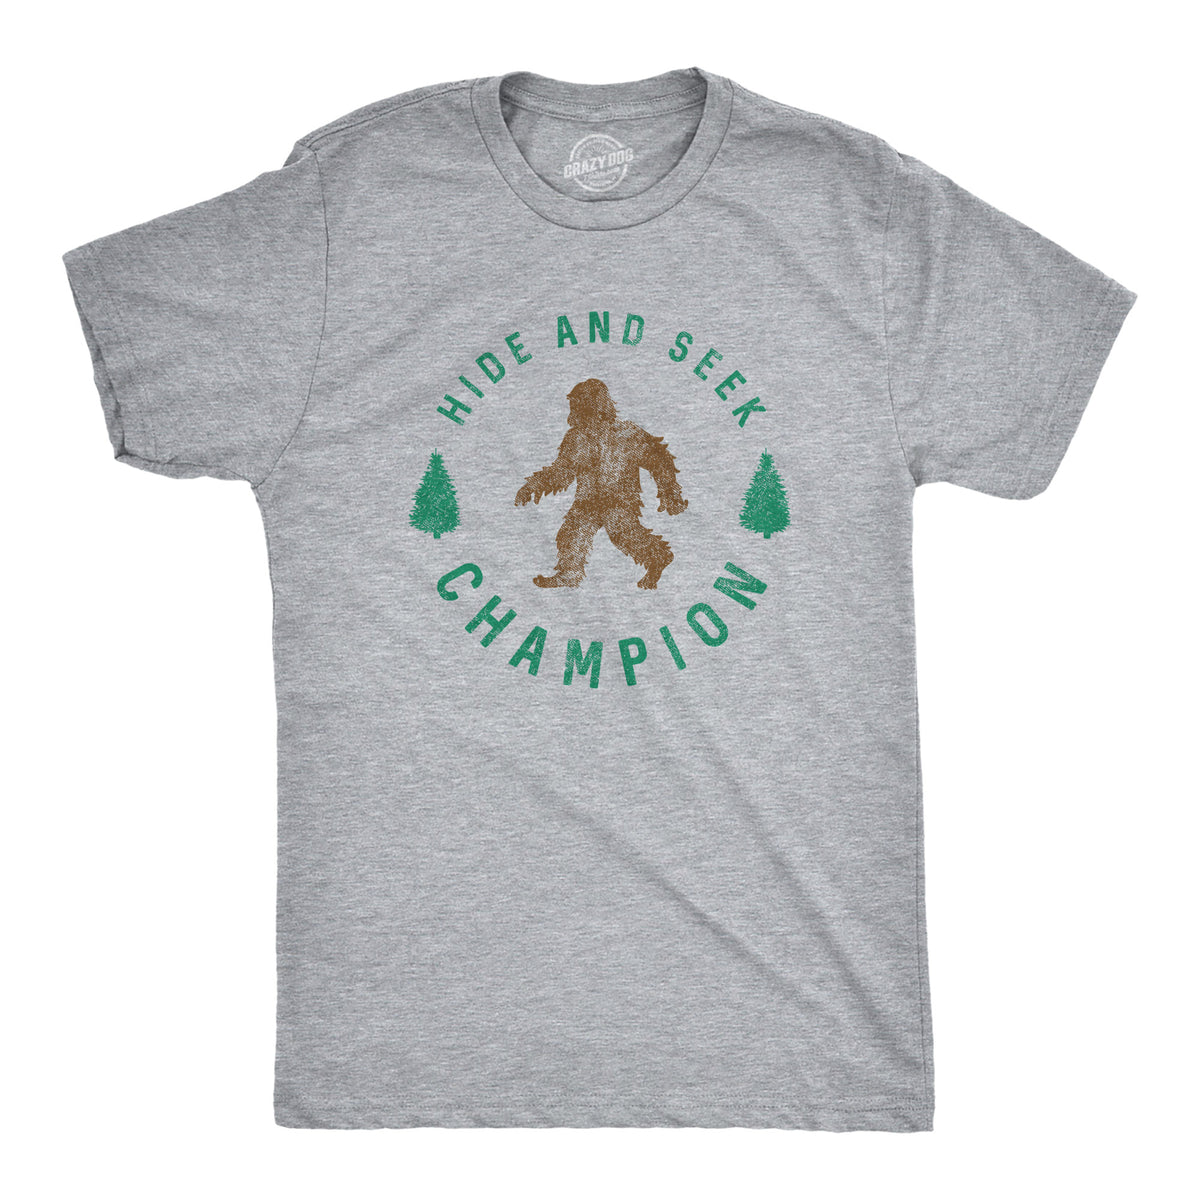 Funny Light Heather Grey Hide And Seek Champion Mens T Shirt Nerdy camping Tee